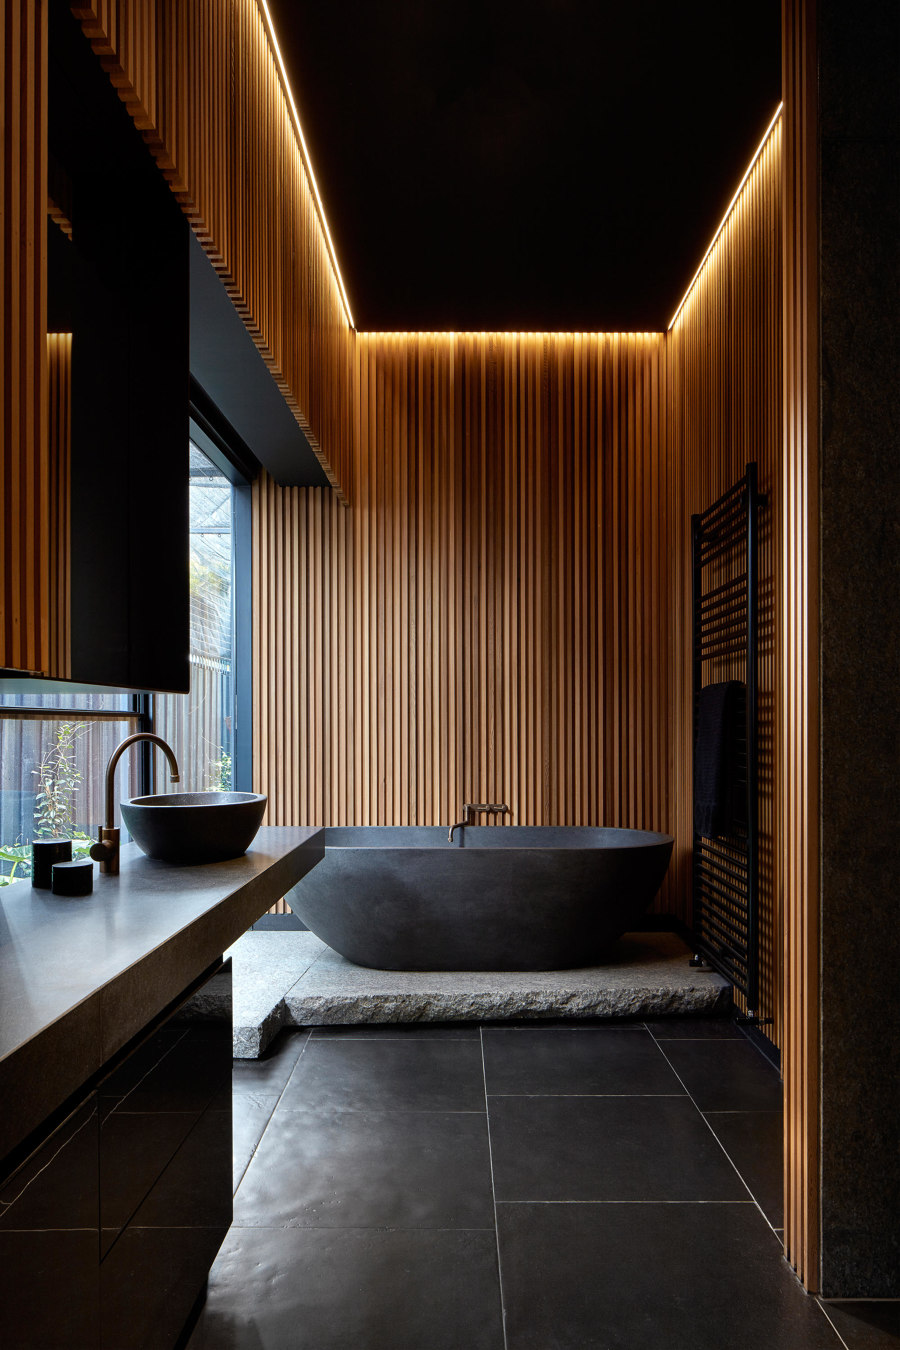 Ablution solutions: residential bathrooms up the design ante | Novedades